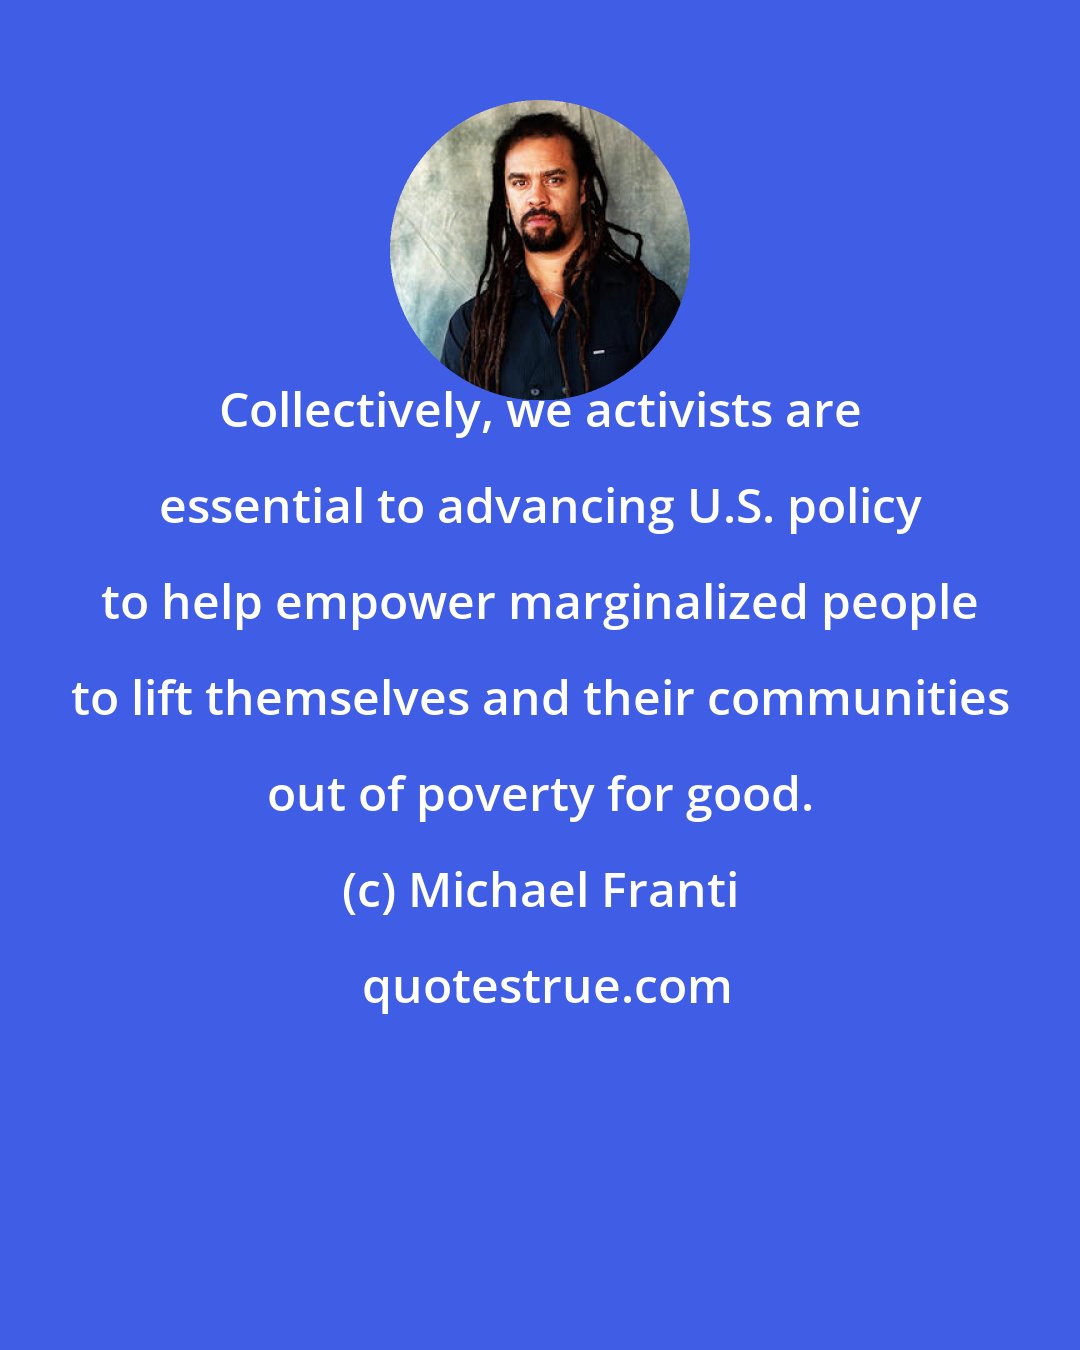 Michael Franti: Collectively, we activists are essential to advancing U.S. policy to help empower marginalized people to lift themselves and their communities out of poverty for good.